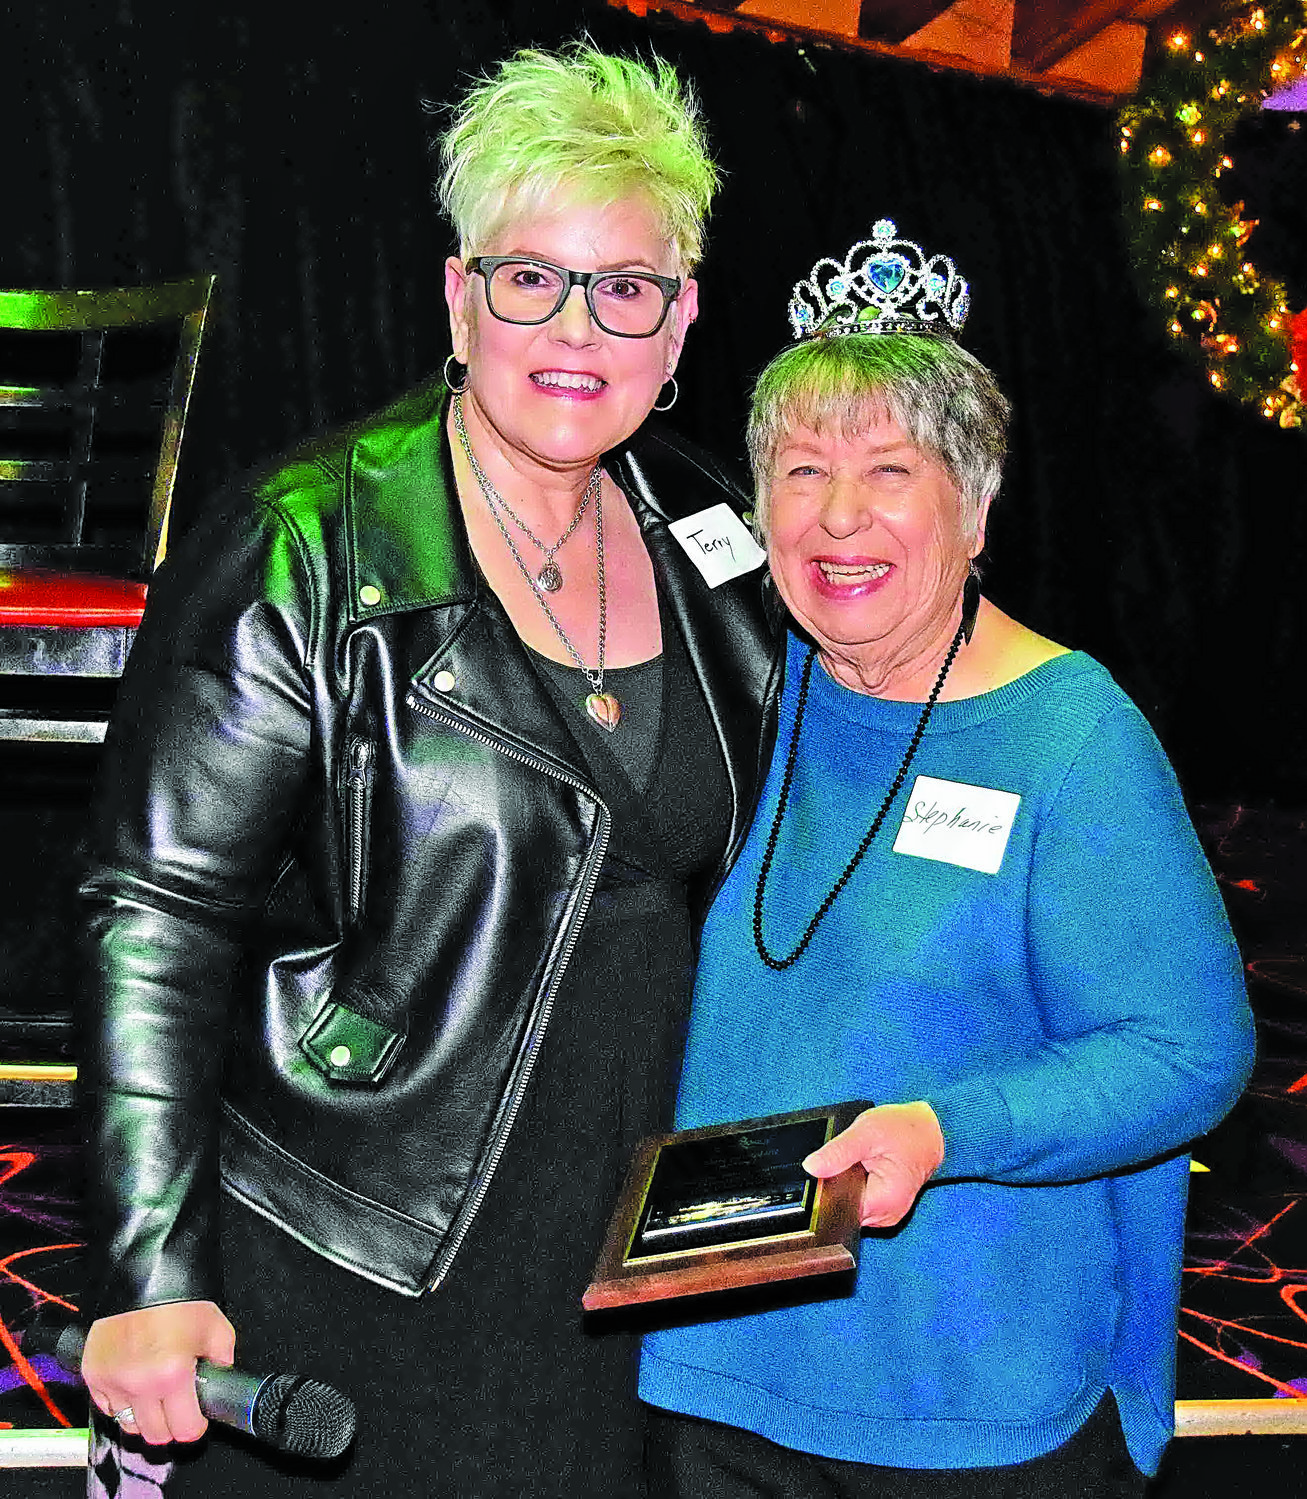 Stephanie Nagy receives the 2021 ICON award for a lifetime of community service.